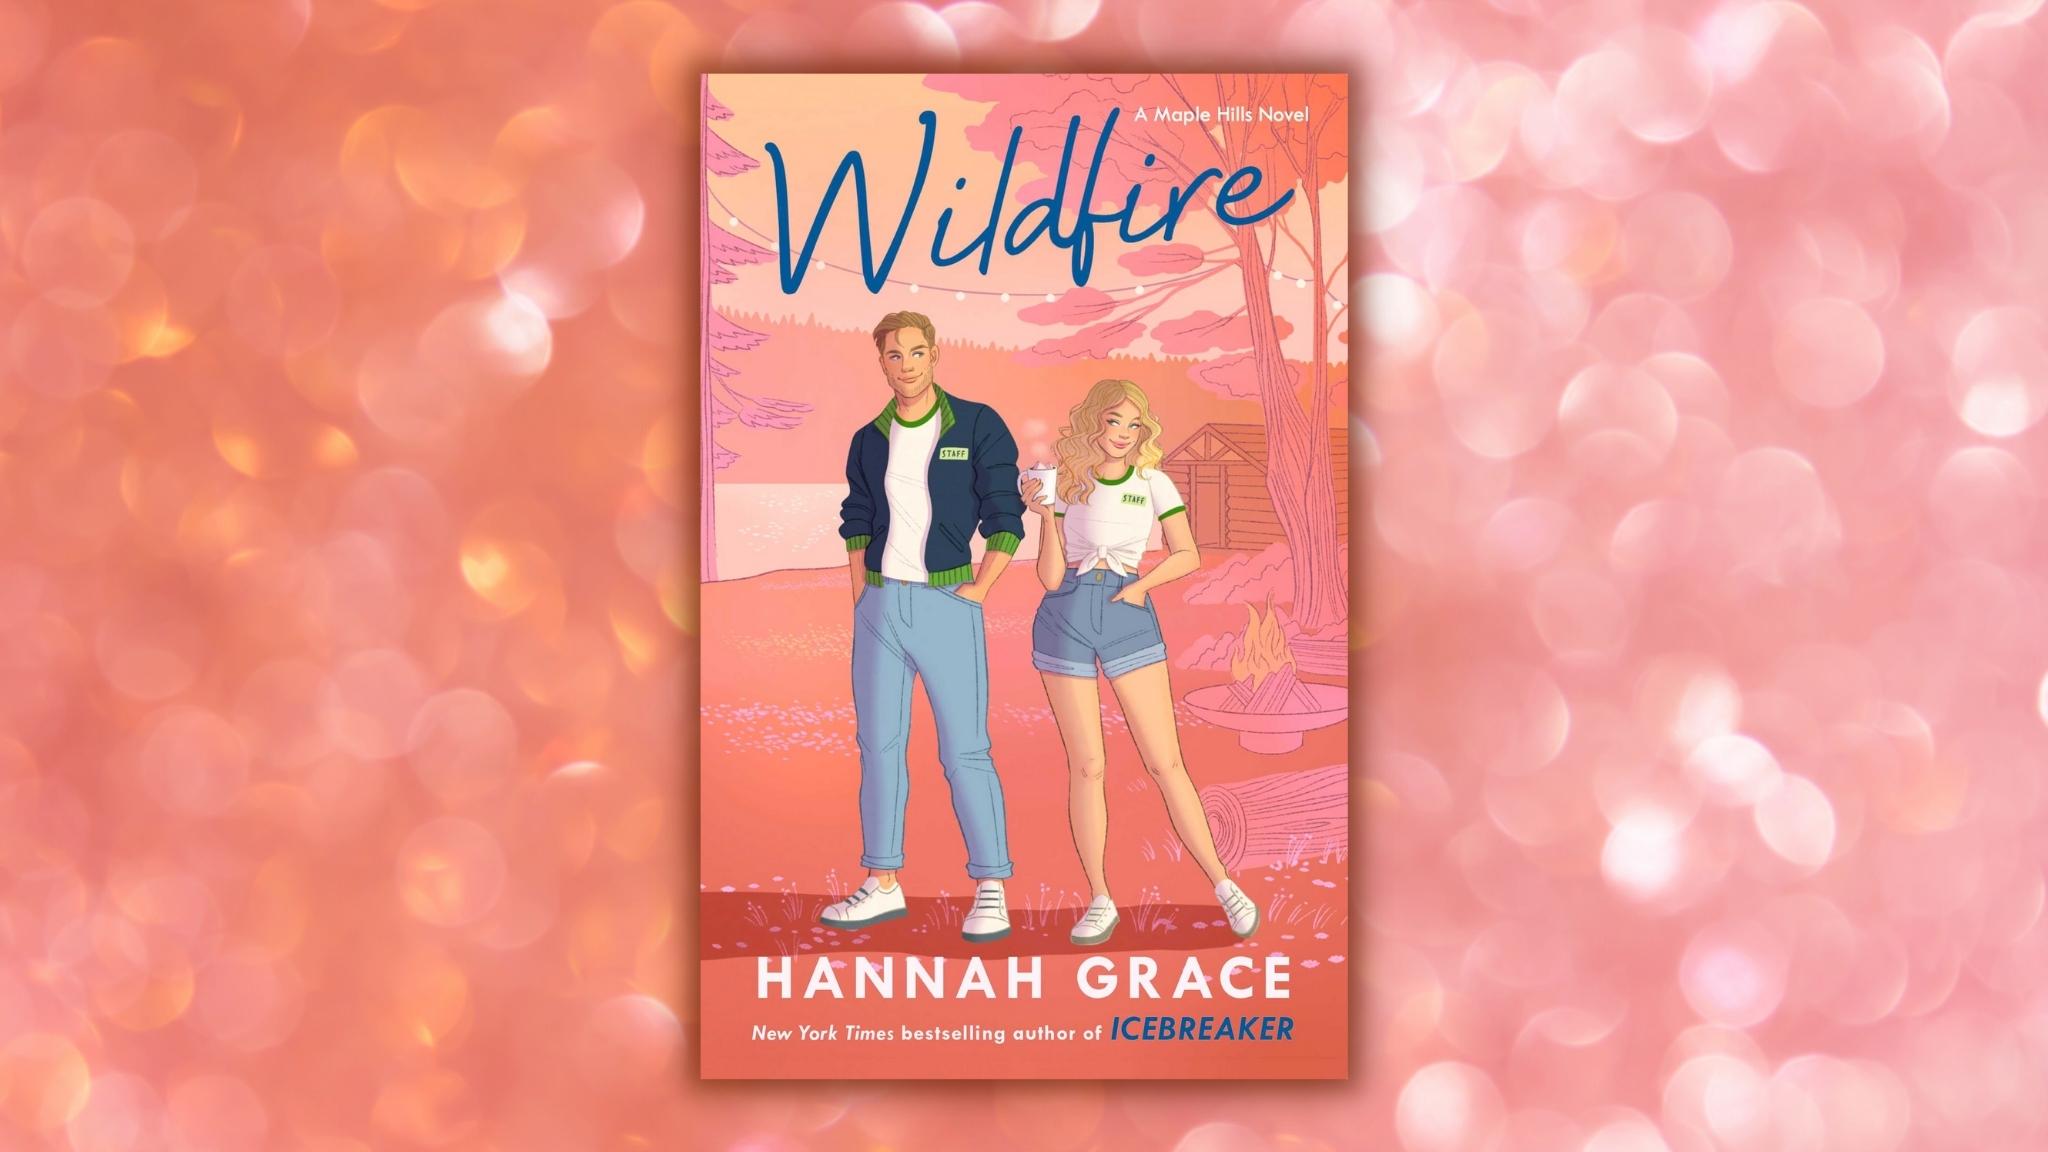 Bestselling Author of “Icebreaker” Hannah Grace Talks About Her Hit New  Romcom, “Wildfire”